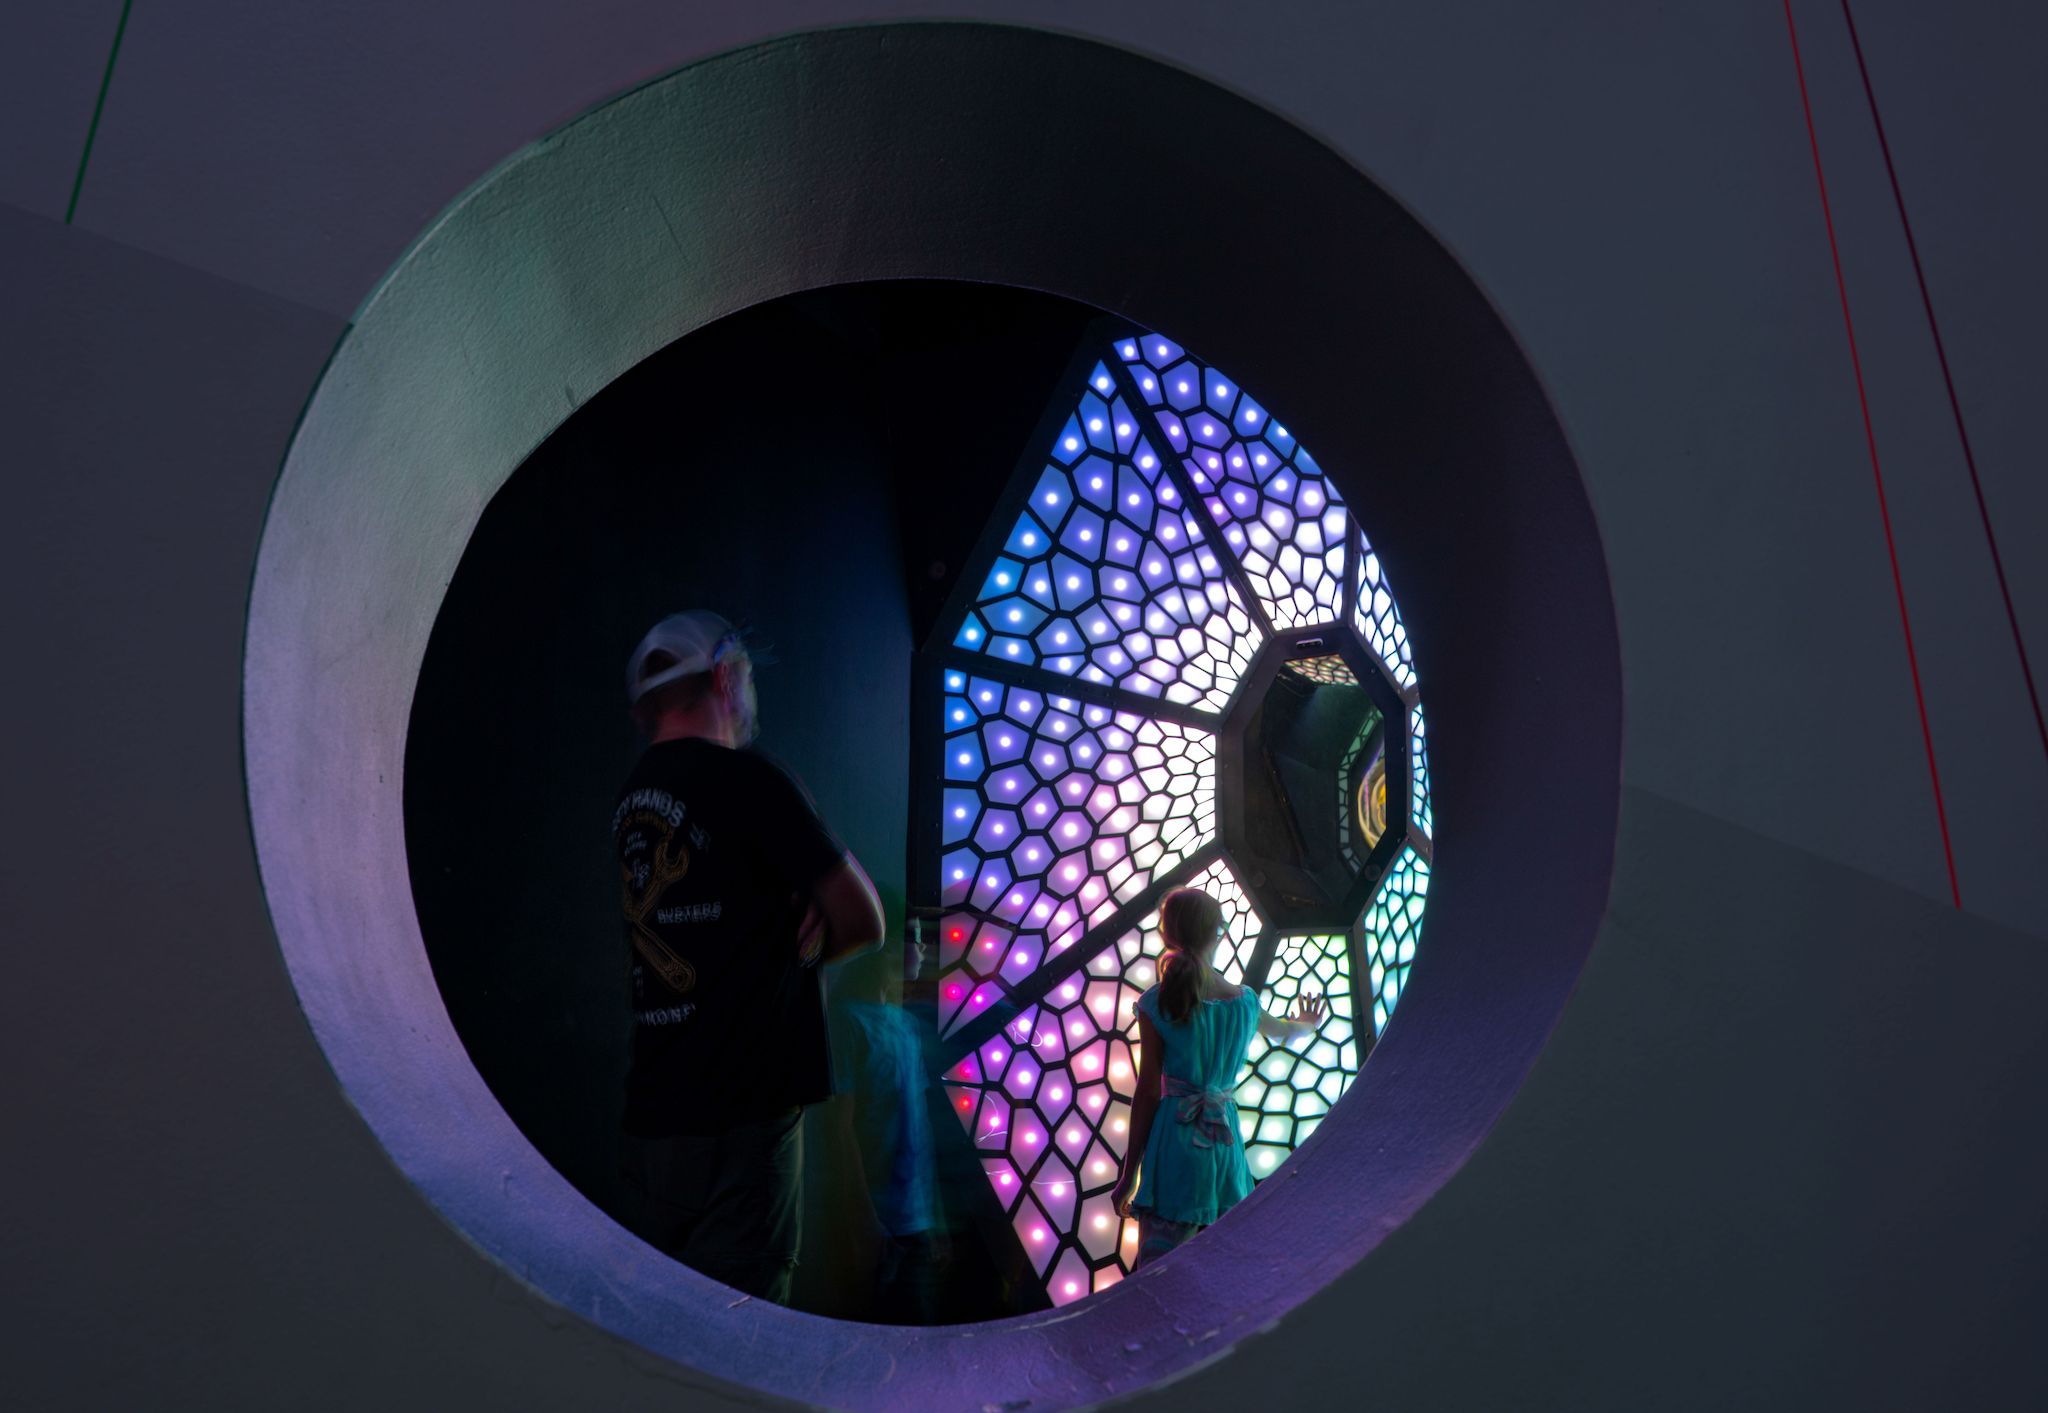 A large round opening in a wall at Meow Wolf Grapevine opens onto another artwork, an immense circular stained glass piece looking a bit like an eye or a flower.